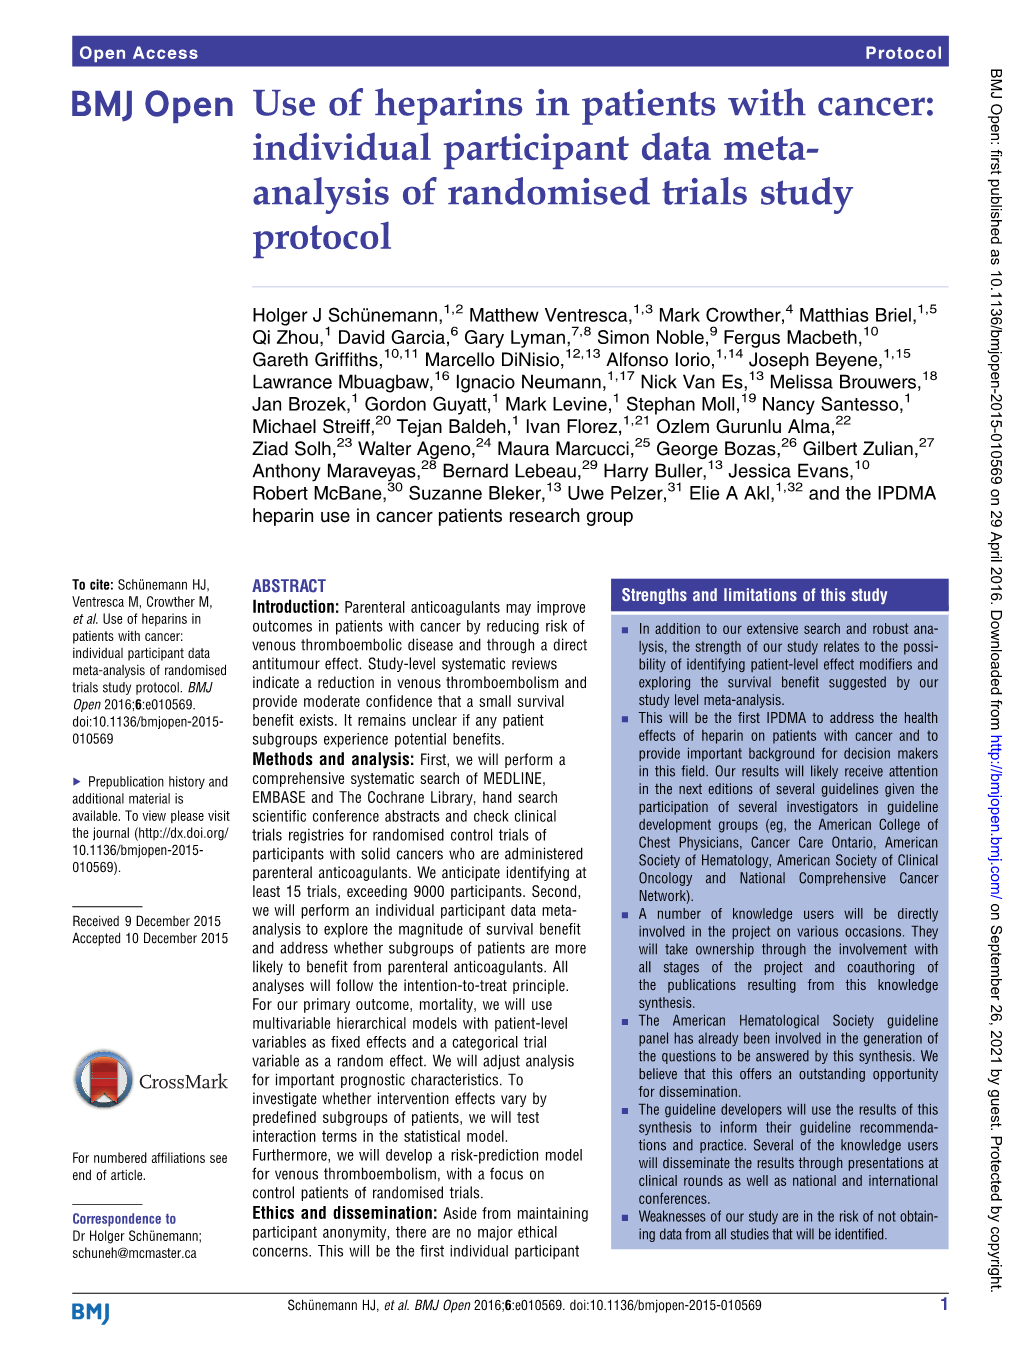 Use of Heparins in Patients with Cancer: Individual Participant Data Meta- Analysis of Randomised Trials Study Protocol